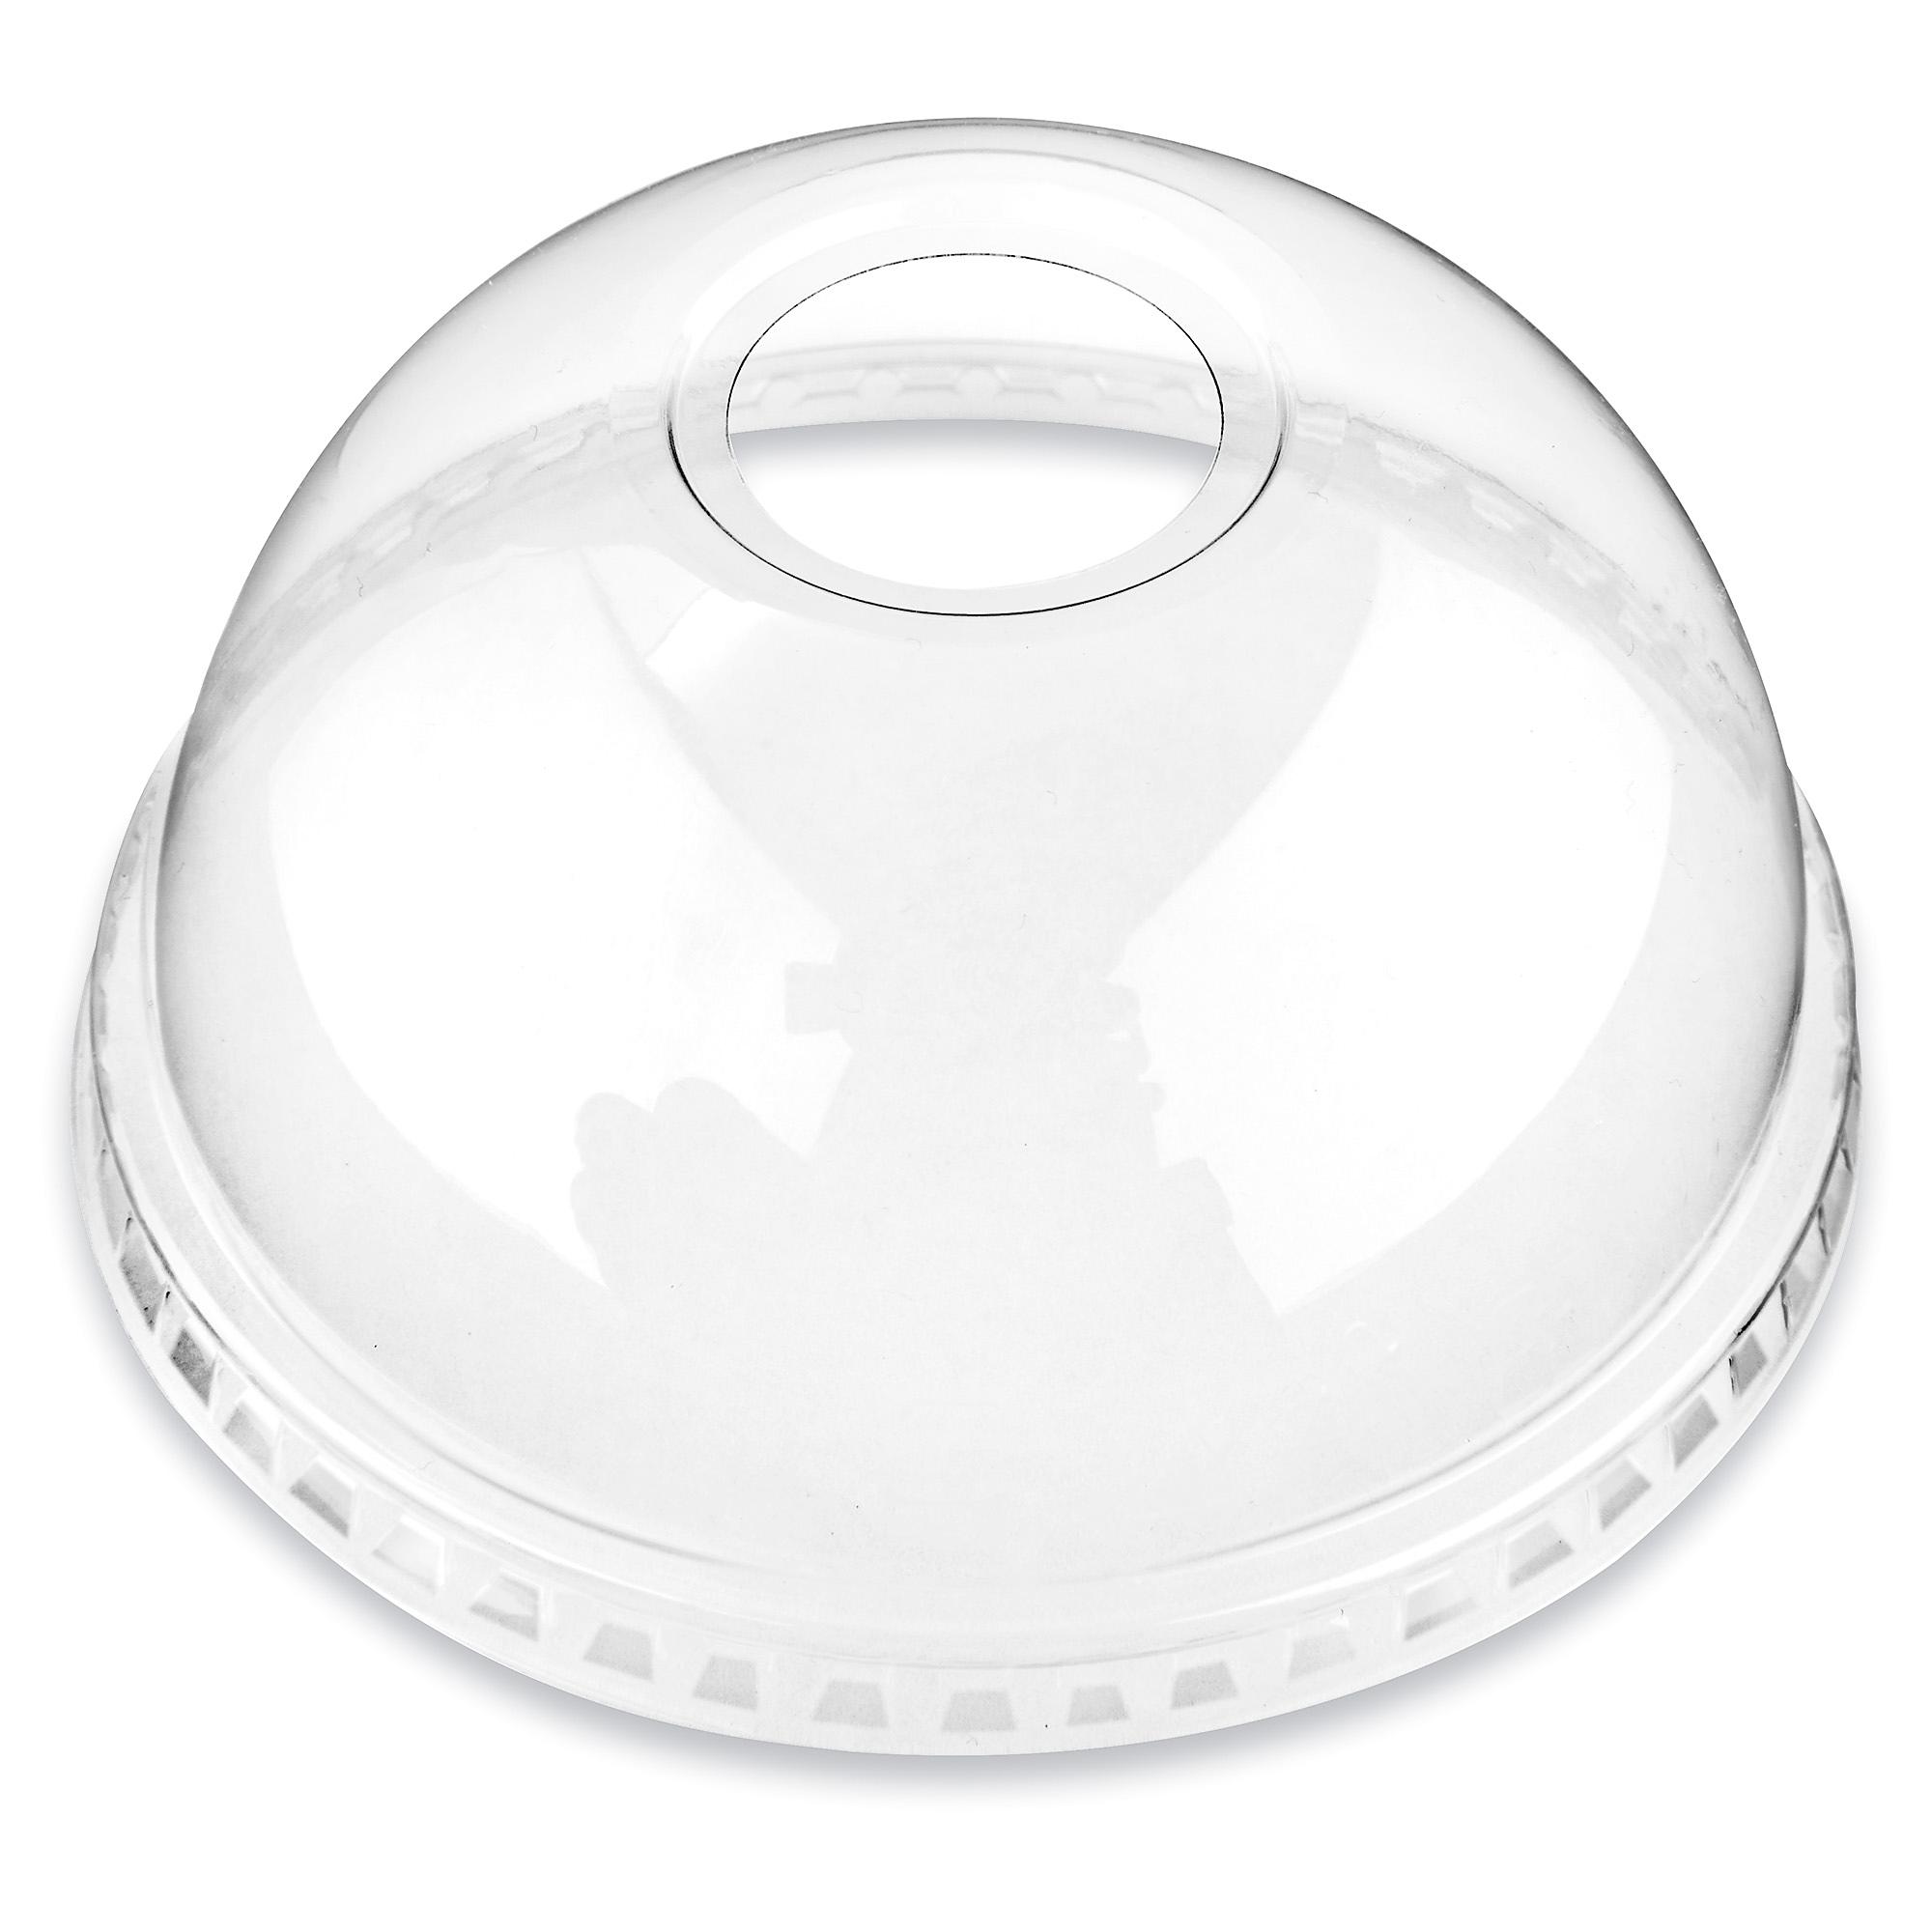 ULINE Crystal Clear Plastic Lid - 9, 12 & 20 oz, Dome - Case of 1,000 - S-22279